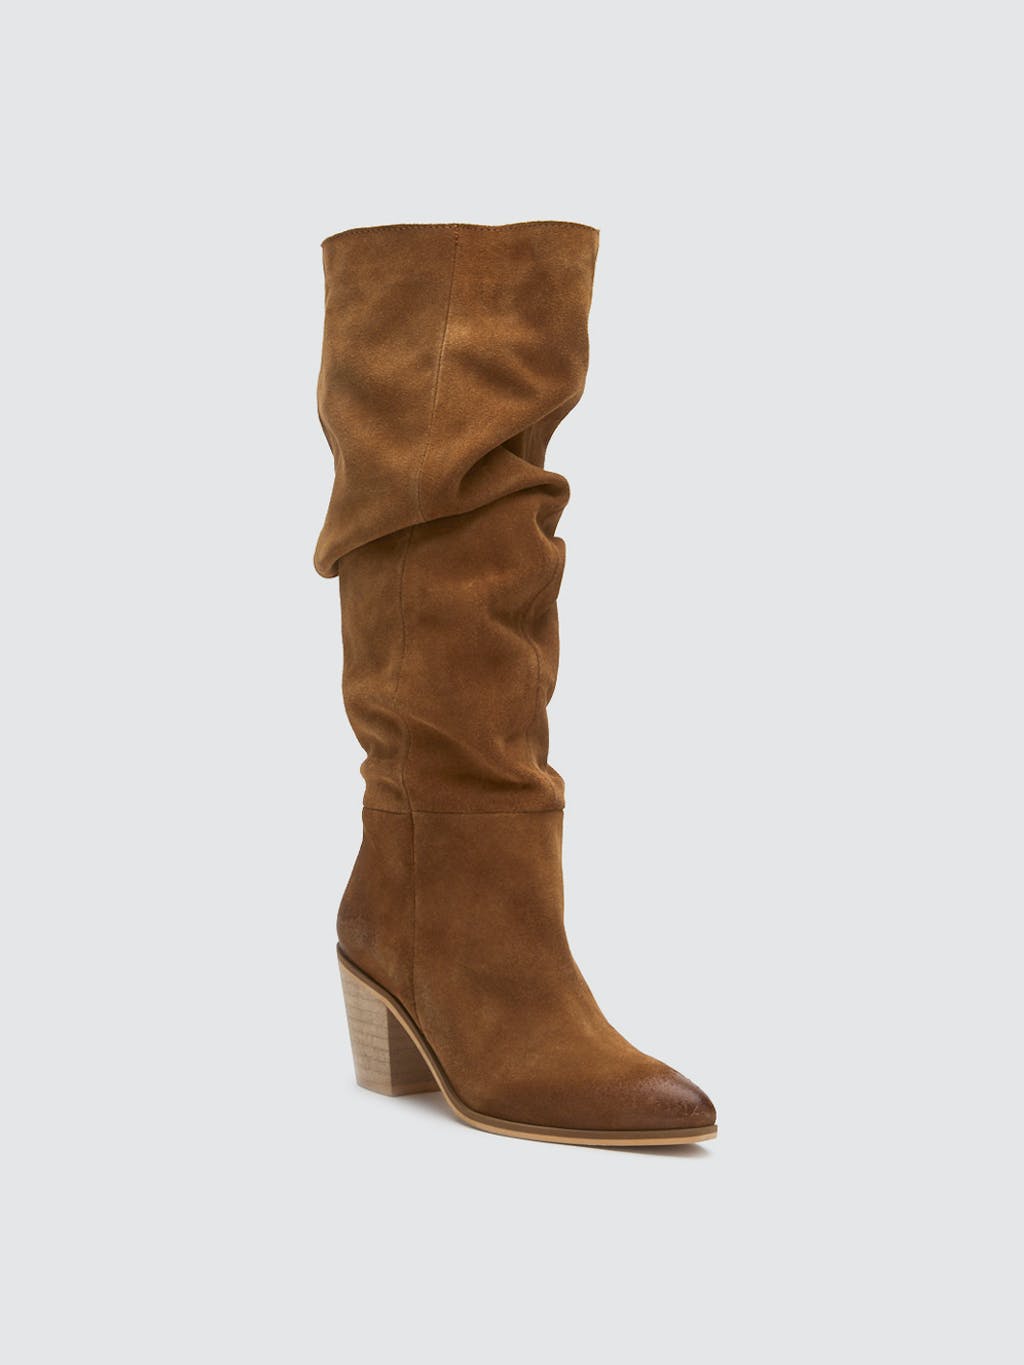 Remi Tan Suede Boot